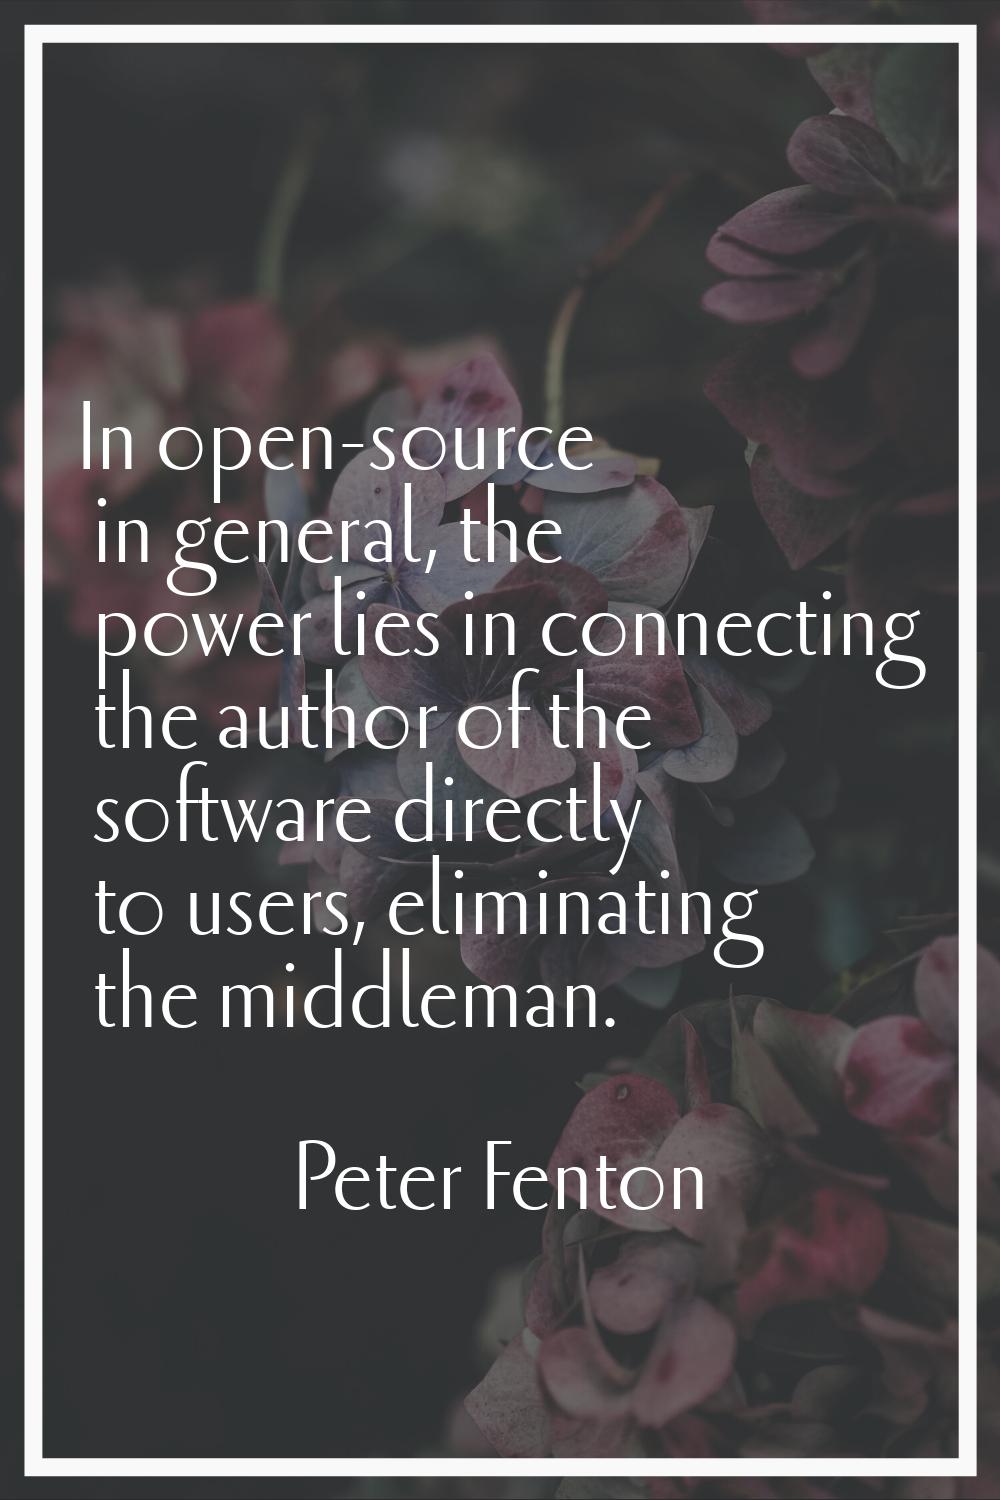 In open-source in general, the power lies in connecting the author of the software directly to user